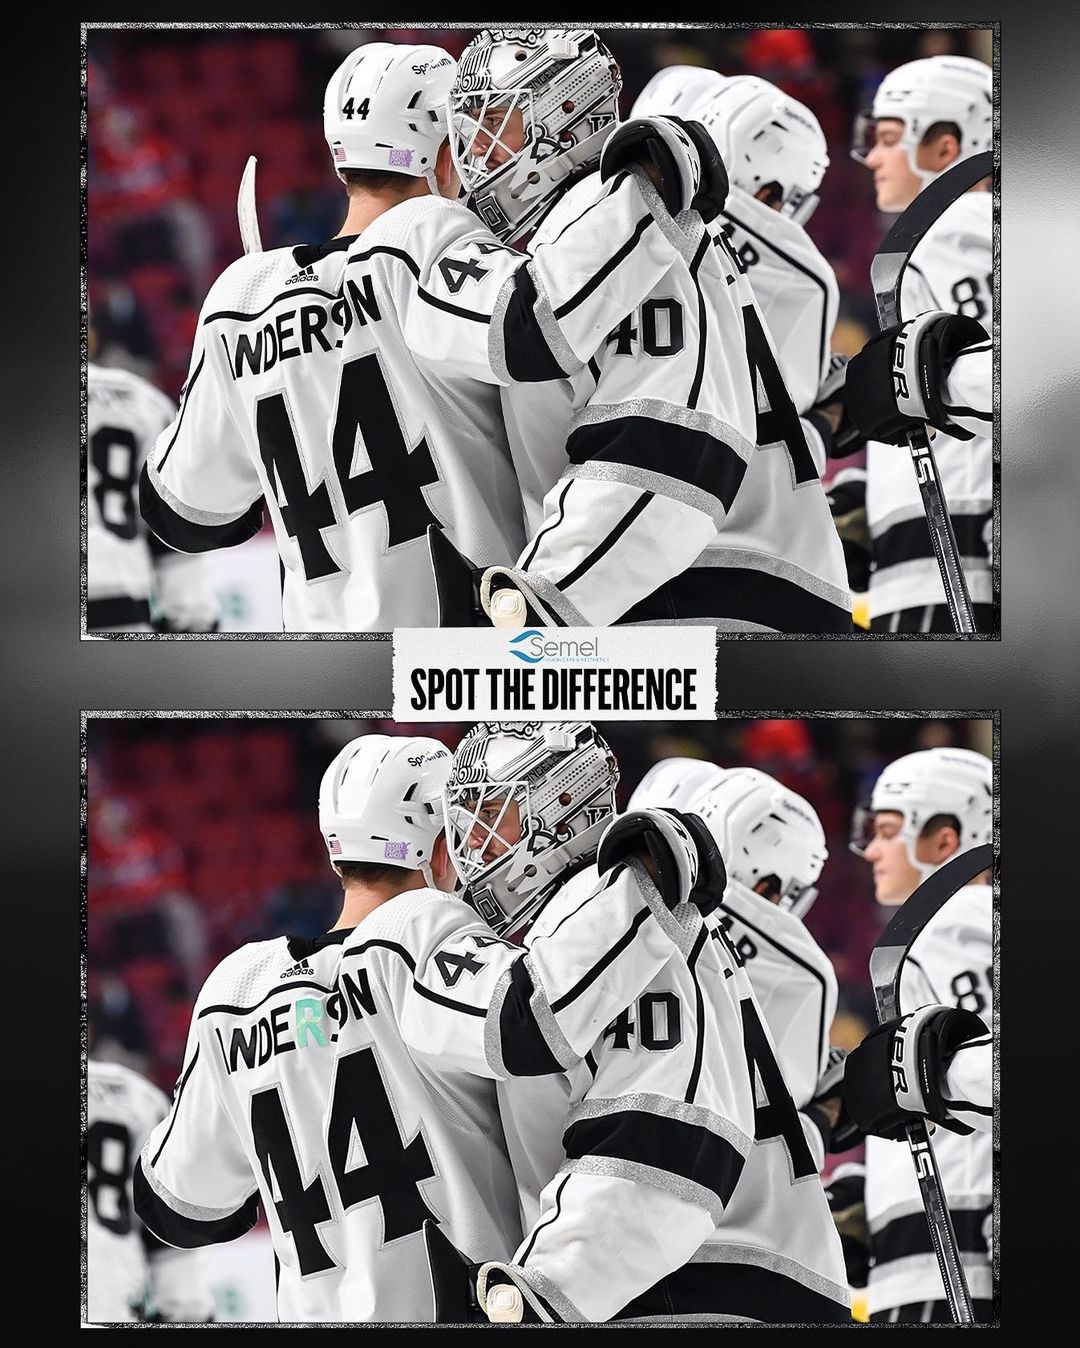 We have faith you can find these ones, Kings fans.  @semelvision | #SpotTheDiff...